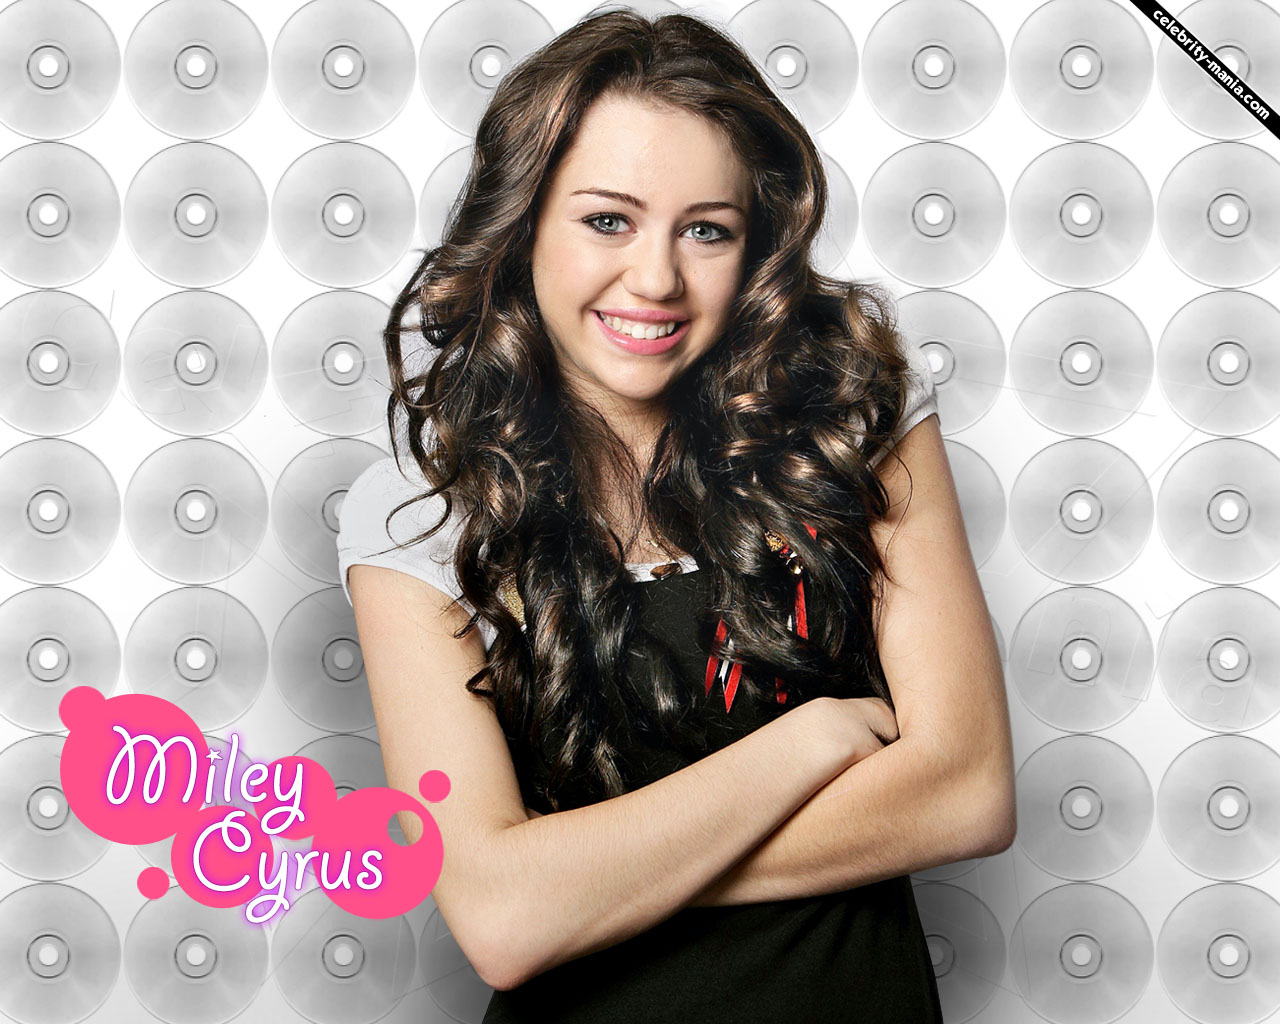 Miley Cyrus Hd Pictures - Miley Cyrus Images Download , HD Wallpaper & Backgrounds